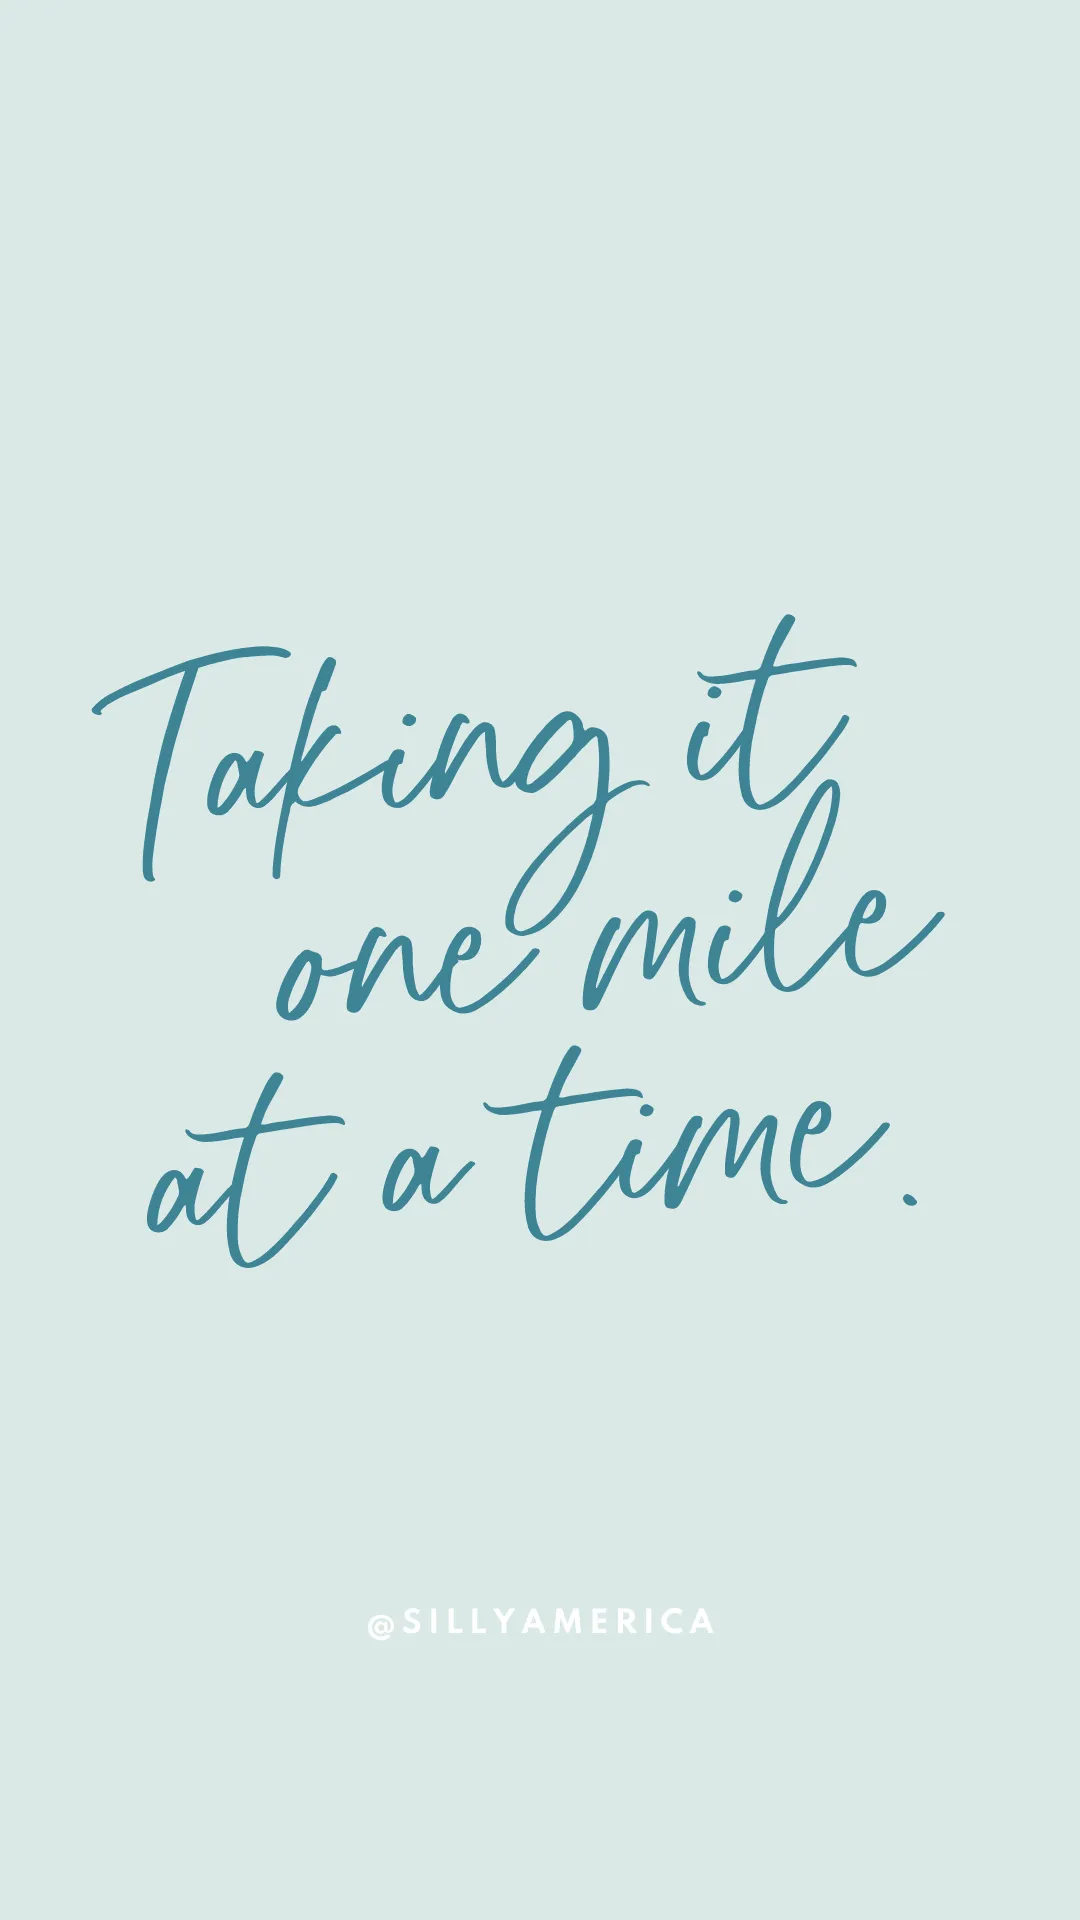 Taking it one mile at a time. - Road Trip Captions for Instagram